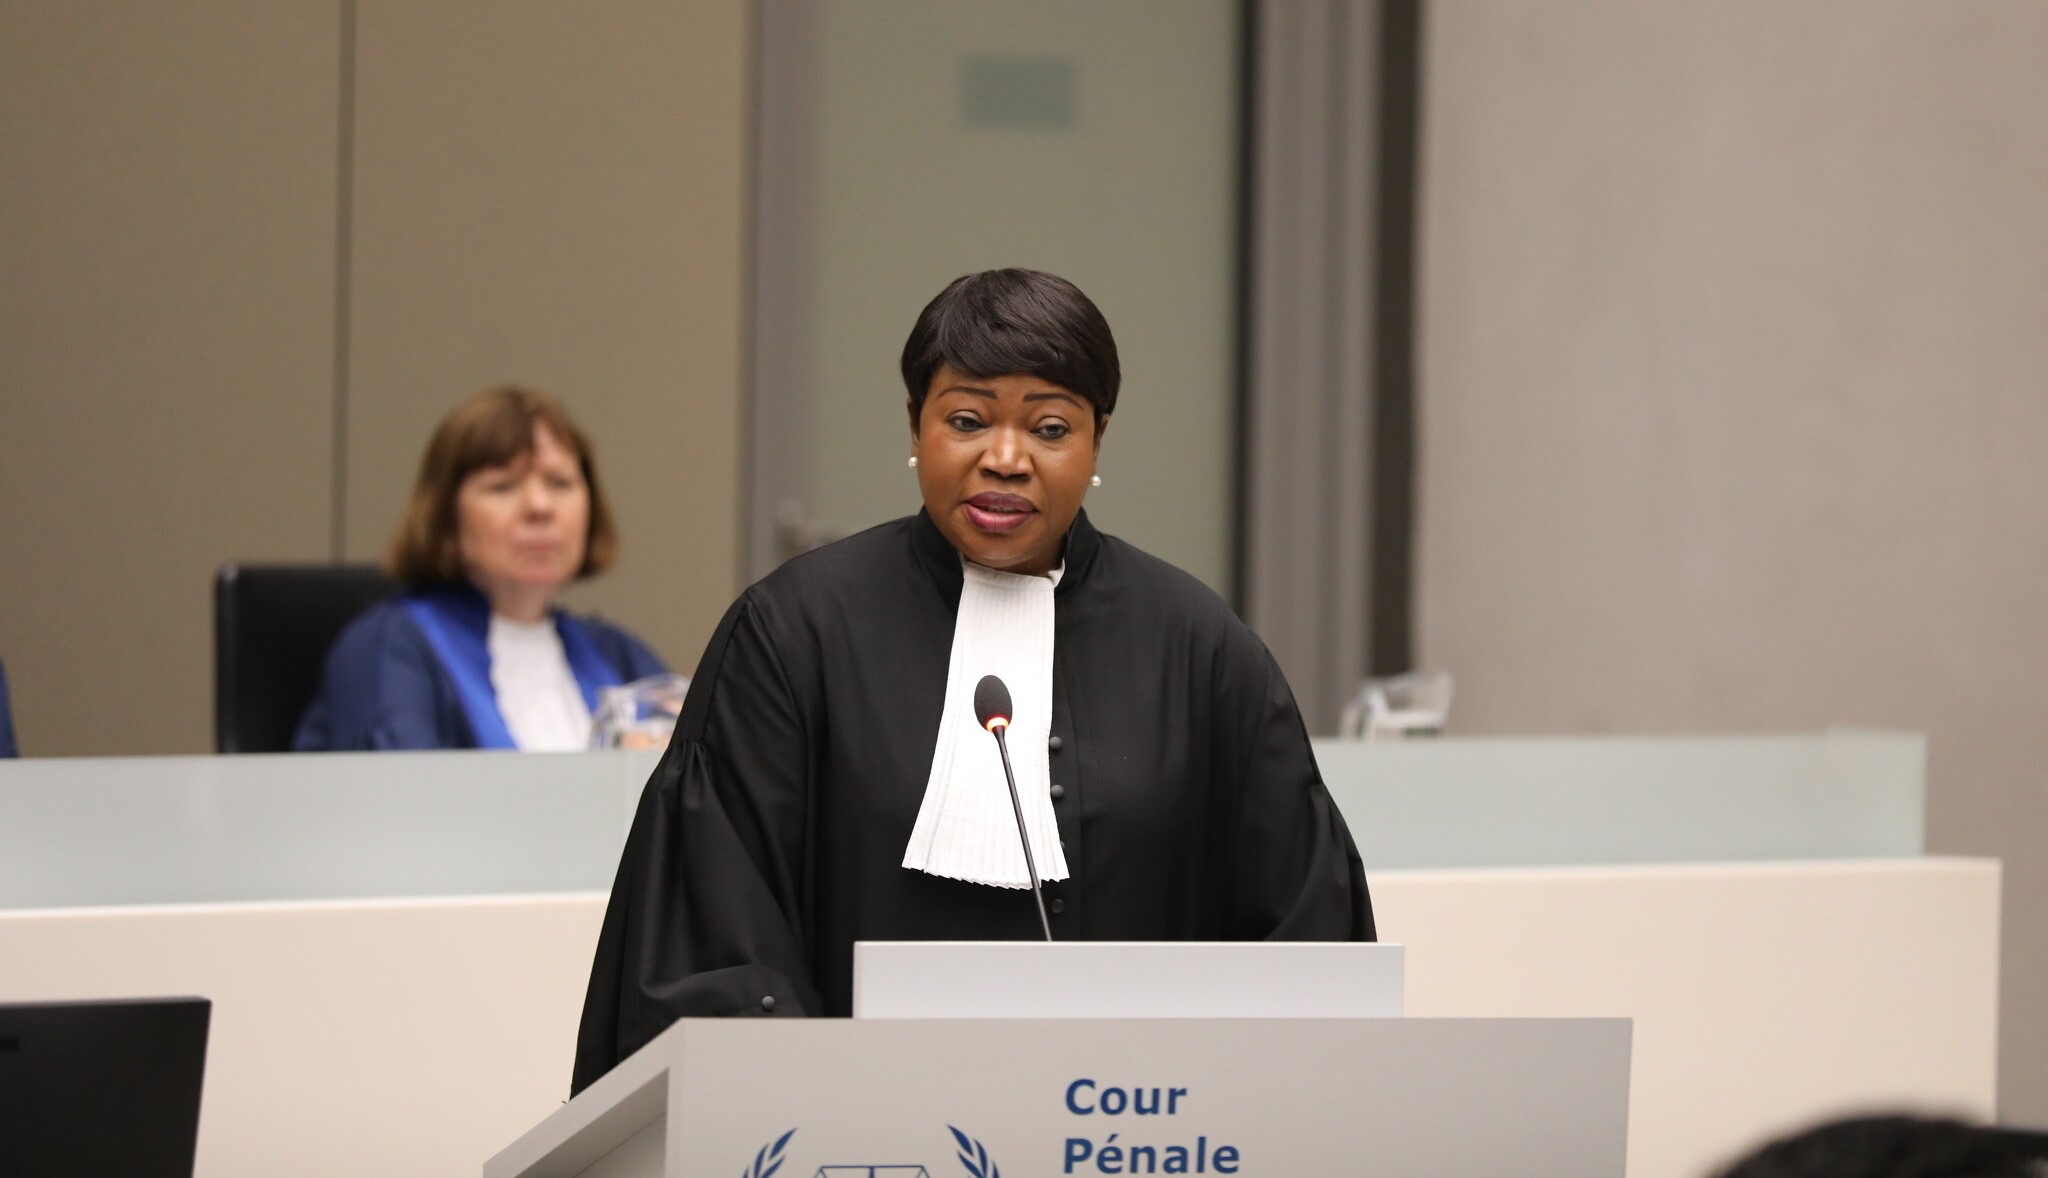 Chief Prosecutor of the International Criminal Court, Fatou Bensouda, during the opening of the court's judicial year at The Hague, January 23, 2020